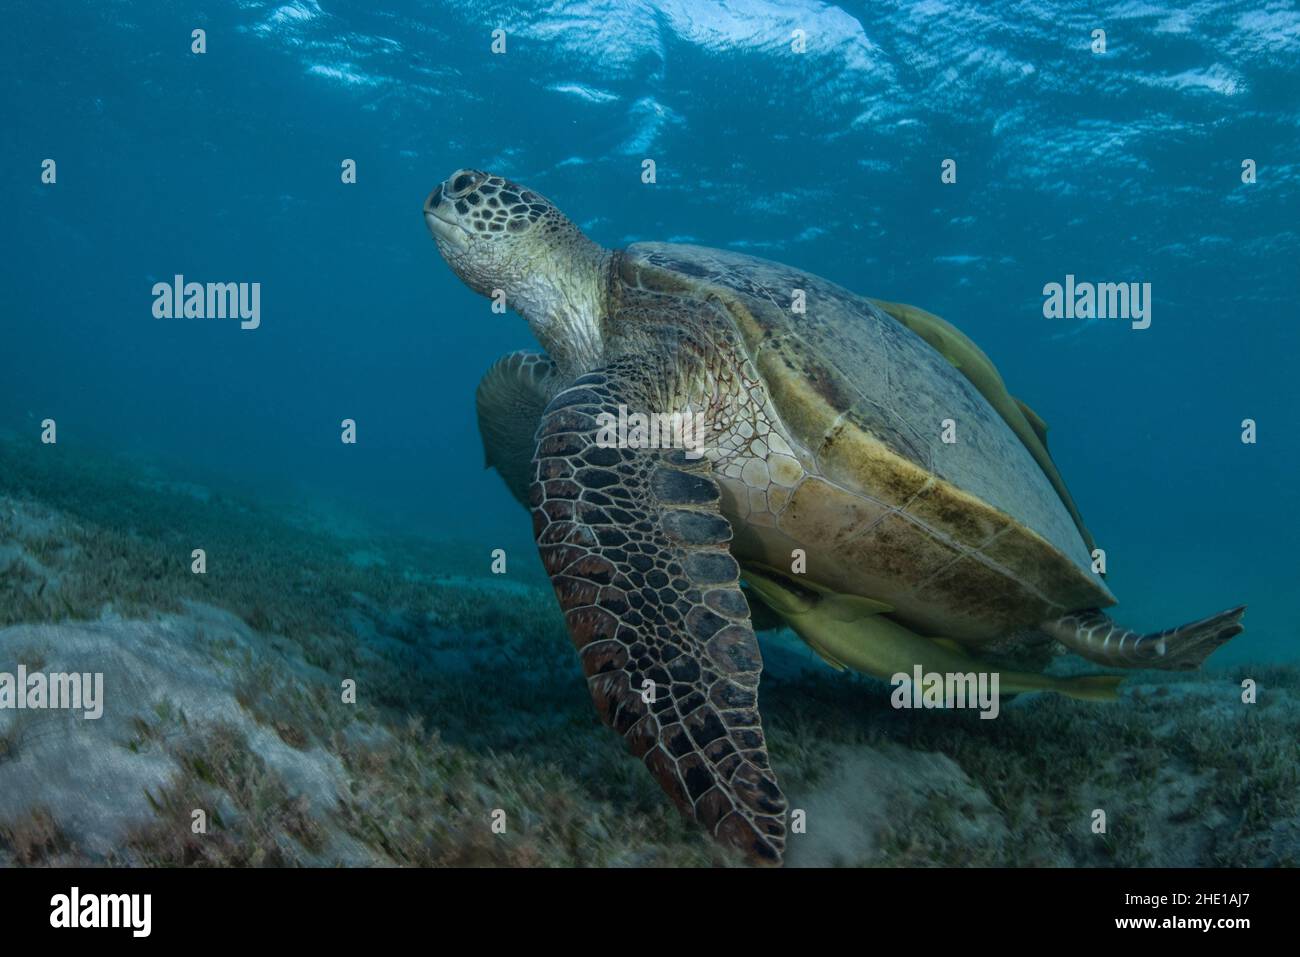 A green sea turtle (Chelonia mydas) an endangered species of reptile feeding on seagrass in the Red sea, Egypt. Stock Photo